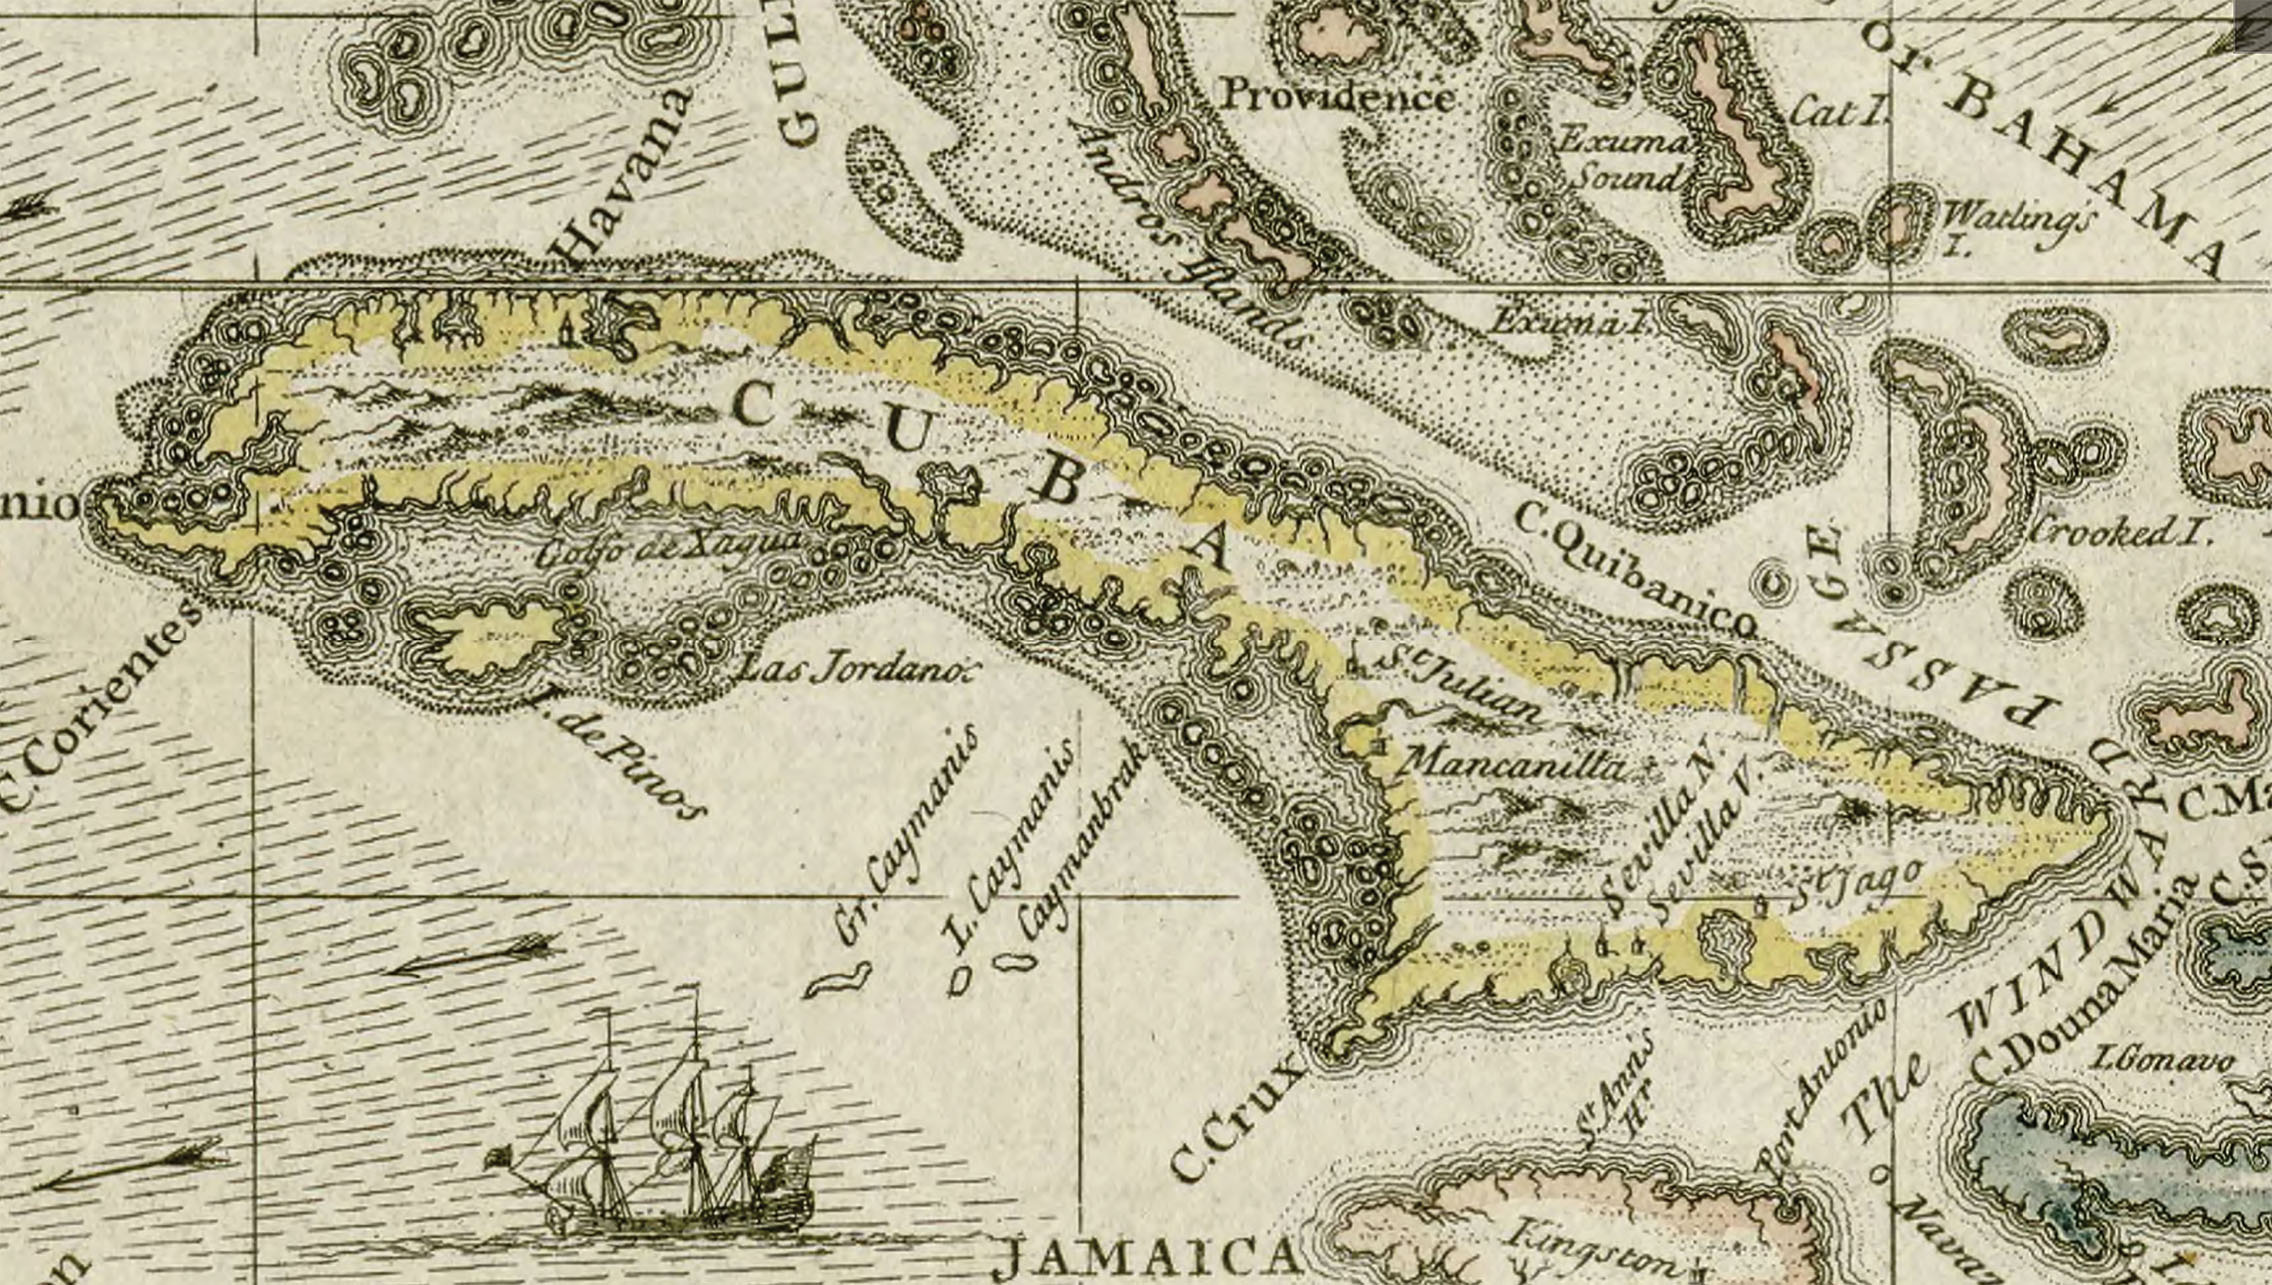 Cuba as shown on an English map by  W.H. Toms in 1733. (Image from Darlington Digital Library, University of Pittsburgh.)